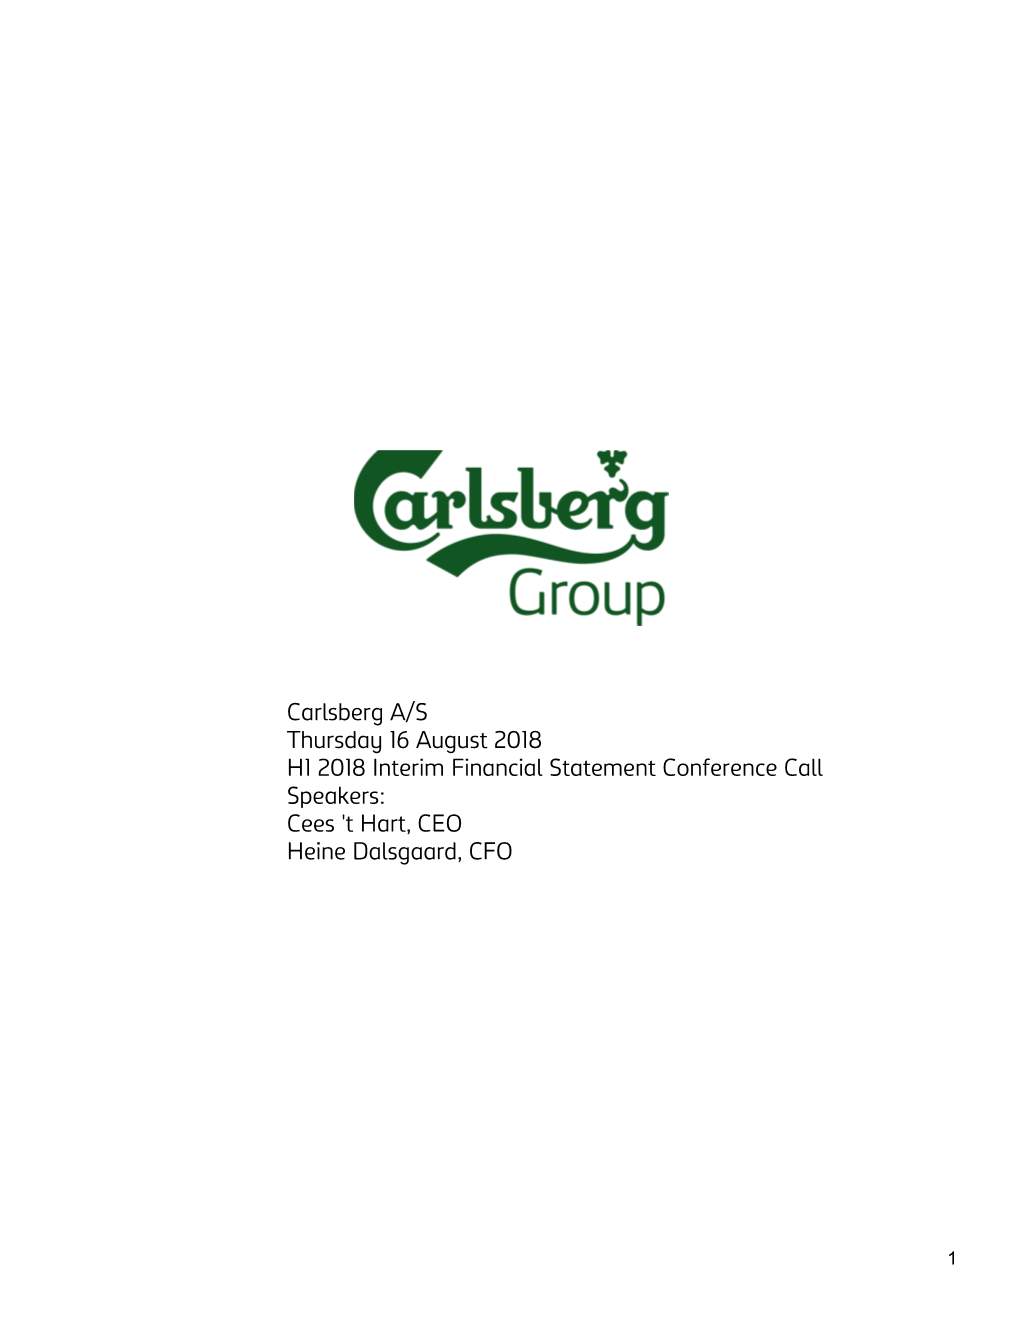 Carlsberg A/S Thursday 16 August 2018 H1 2018 Interim Financial Statement Conference Call Speakers: Cees 'T Hart, CEO Heine Dalsgaard, CFO